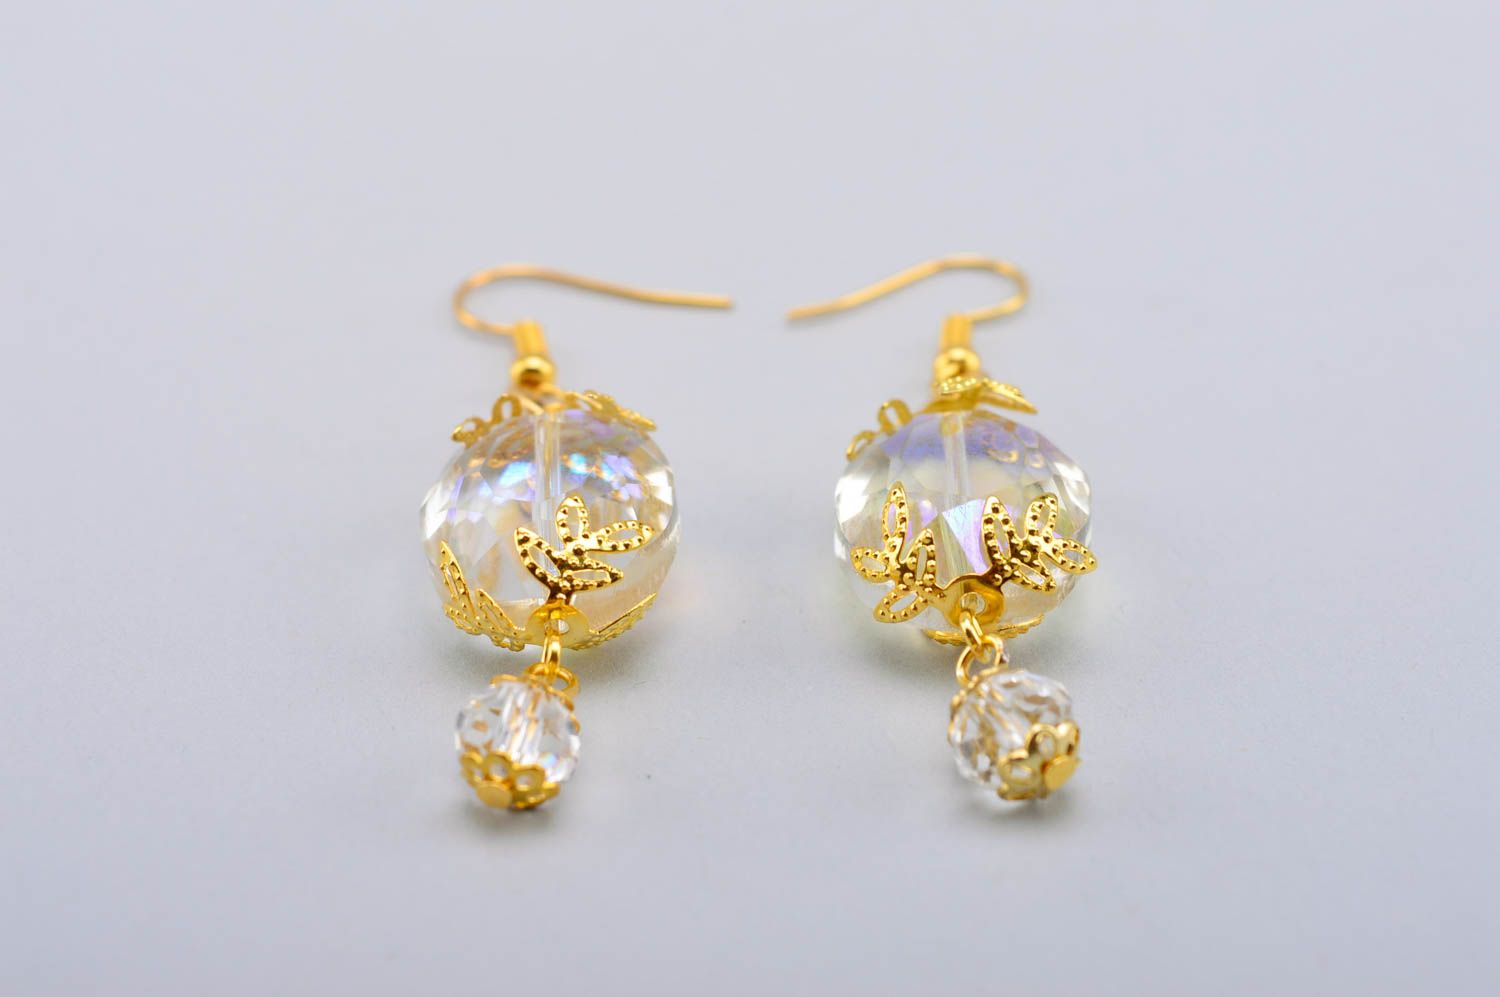 Unusual handmade beaded earrings costume jewelry designs gifts for her photo 3